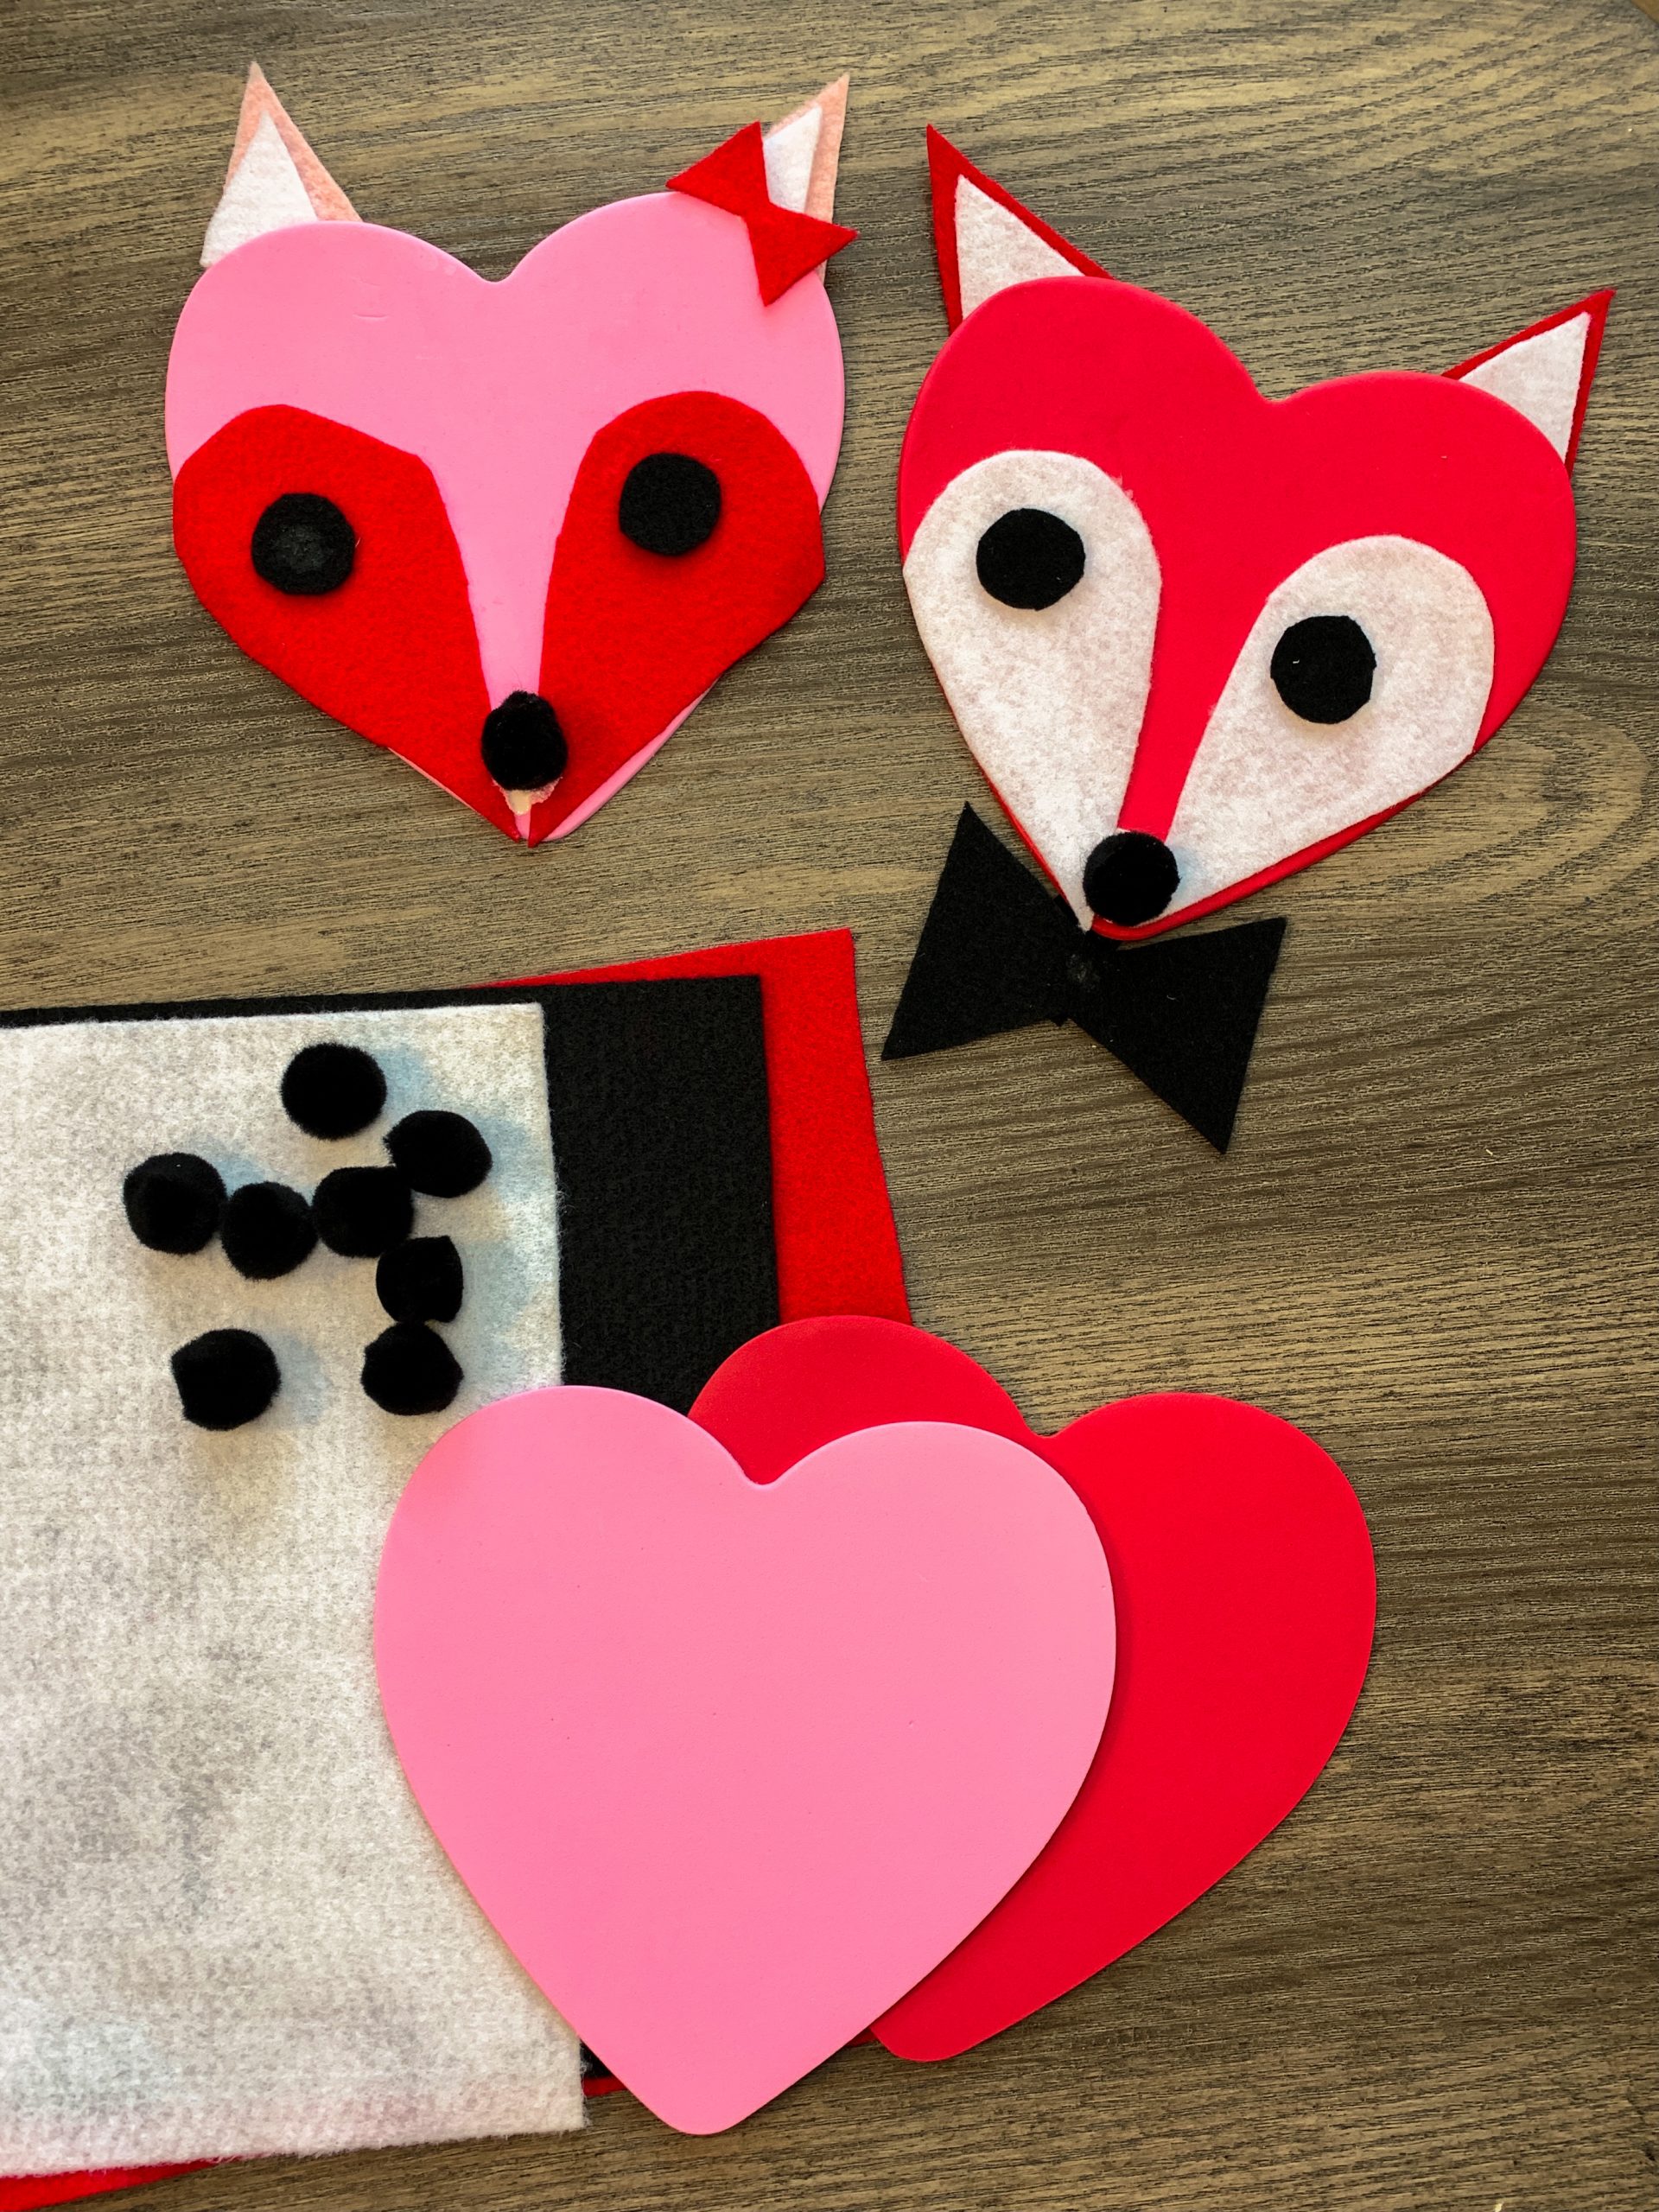 Southern Painstaking courtesy valentines day craft Yes Beginner accent